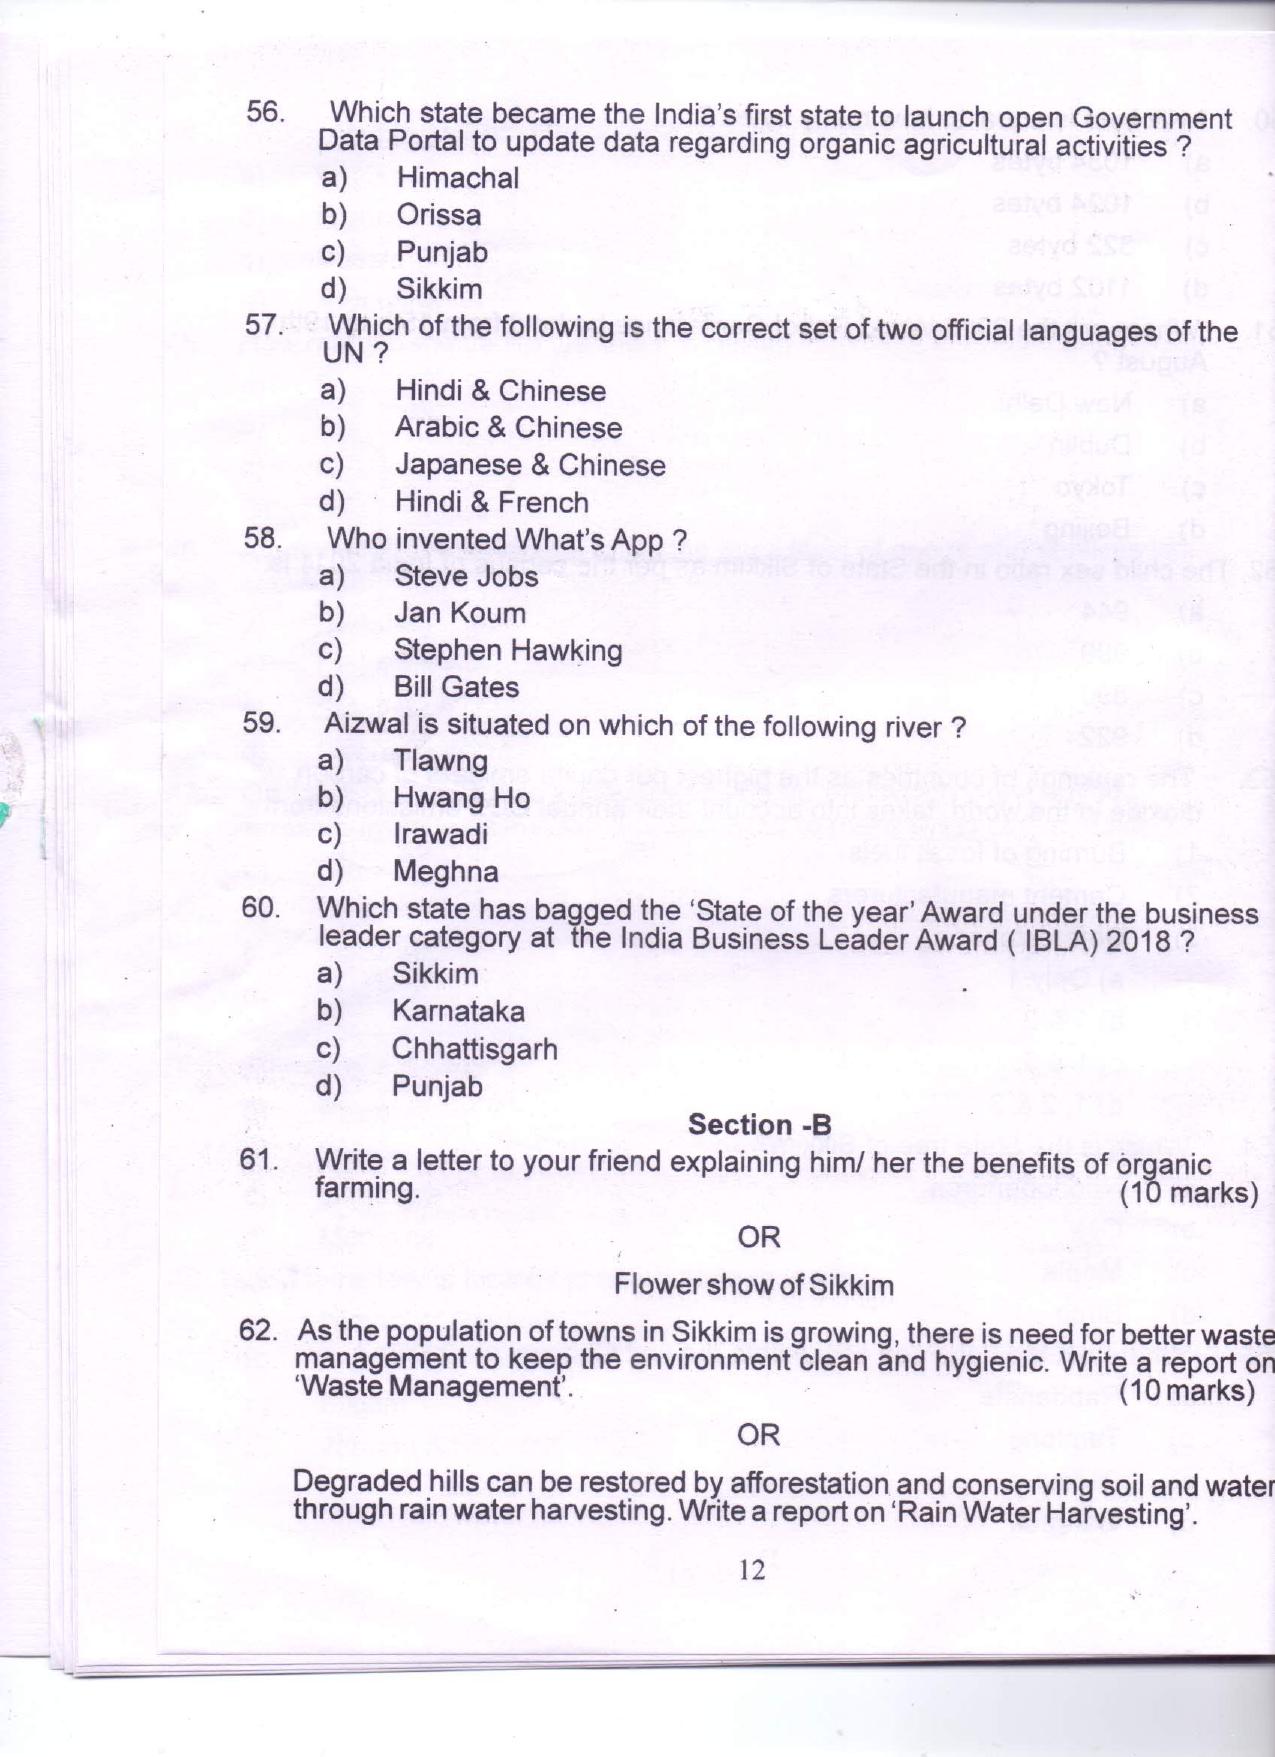 PDF Download Of SPSC MPHW General English & General Knowledge Previous Papers - Page 11